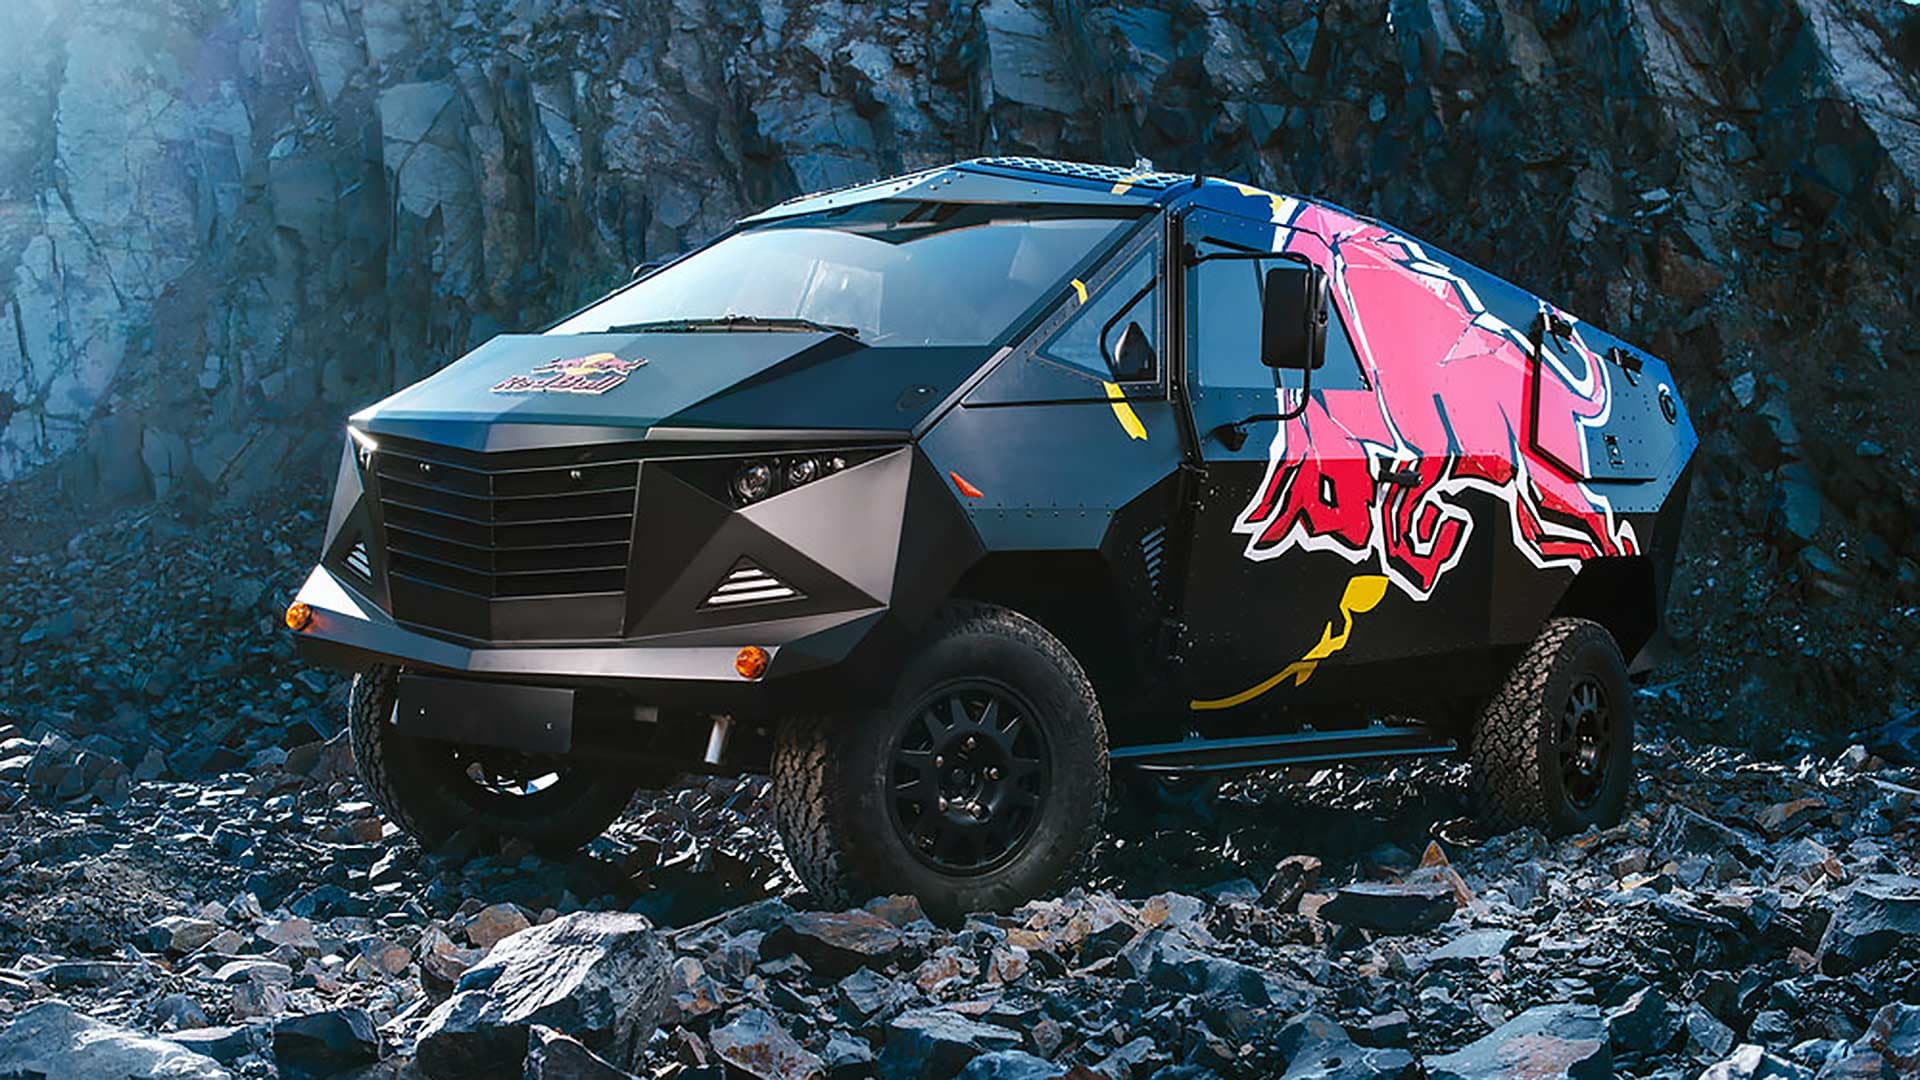 Meet Red Bull’s “Armored Moon Vehicle” Land Rover Defender